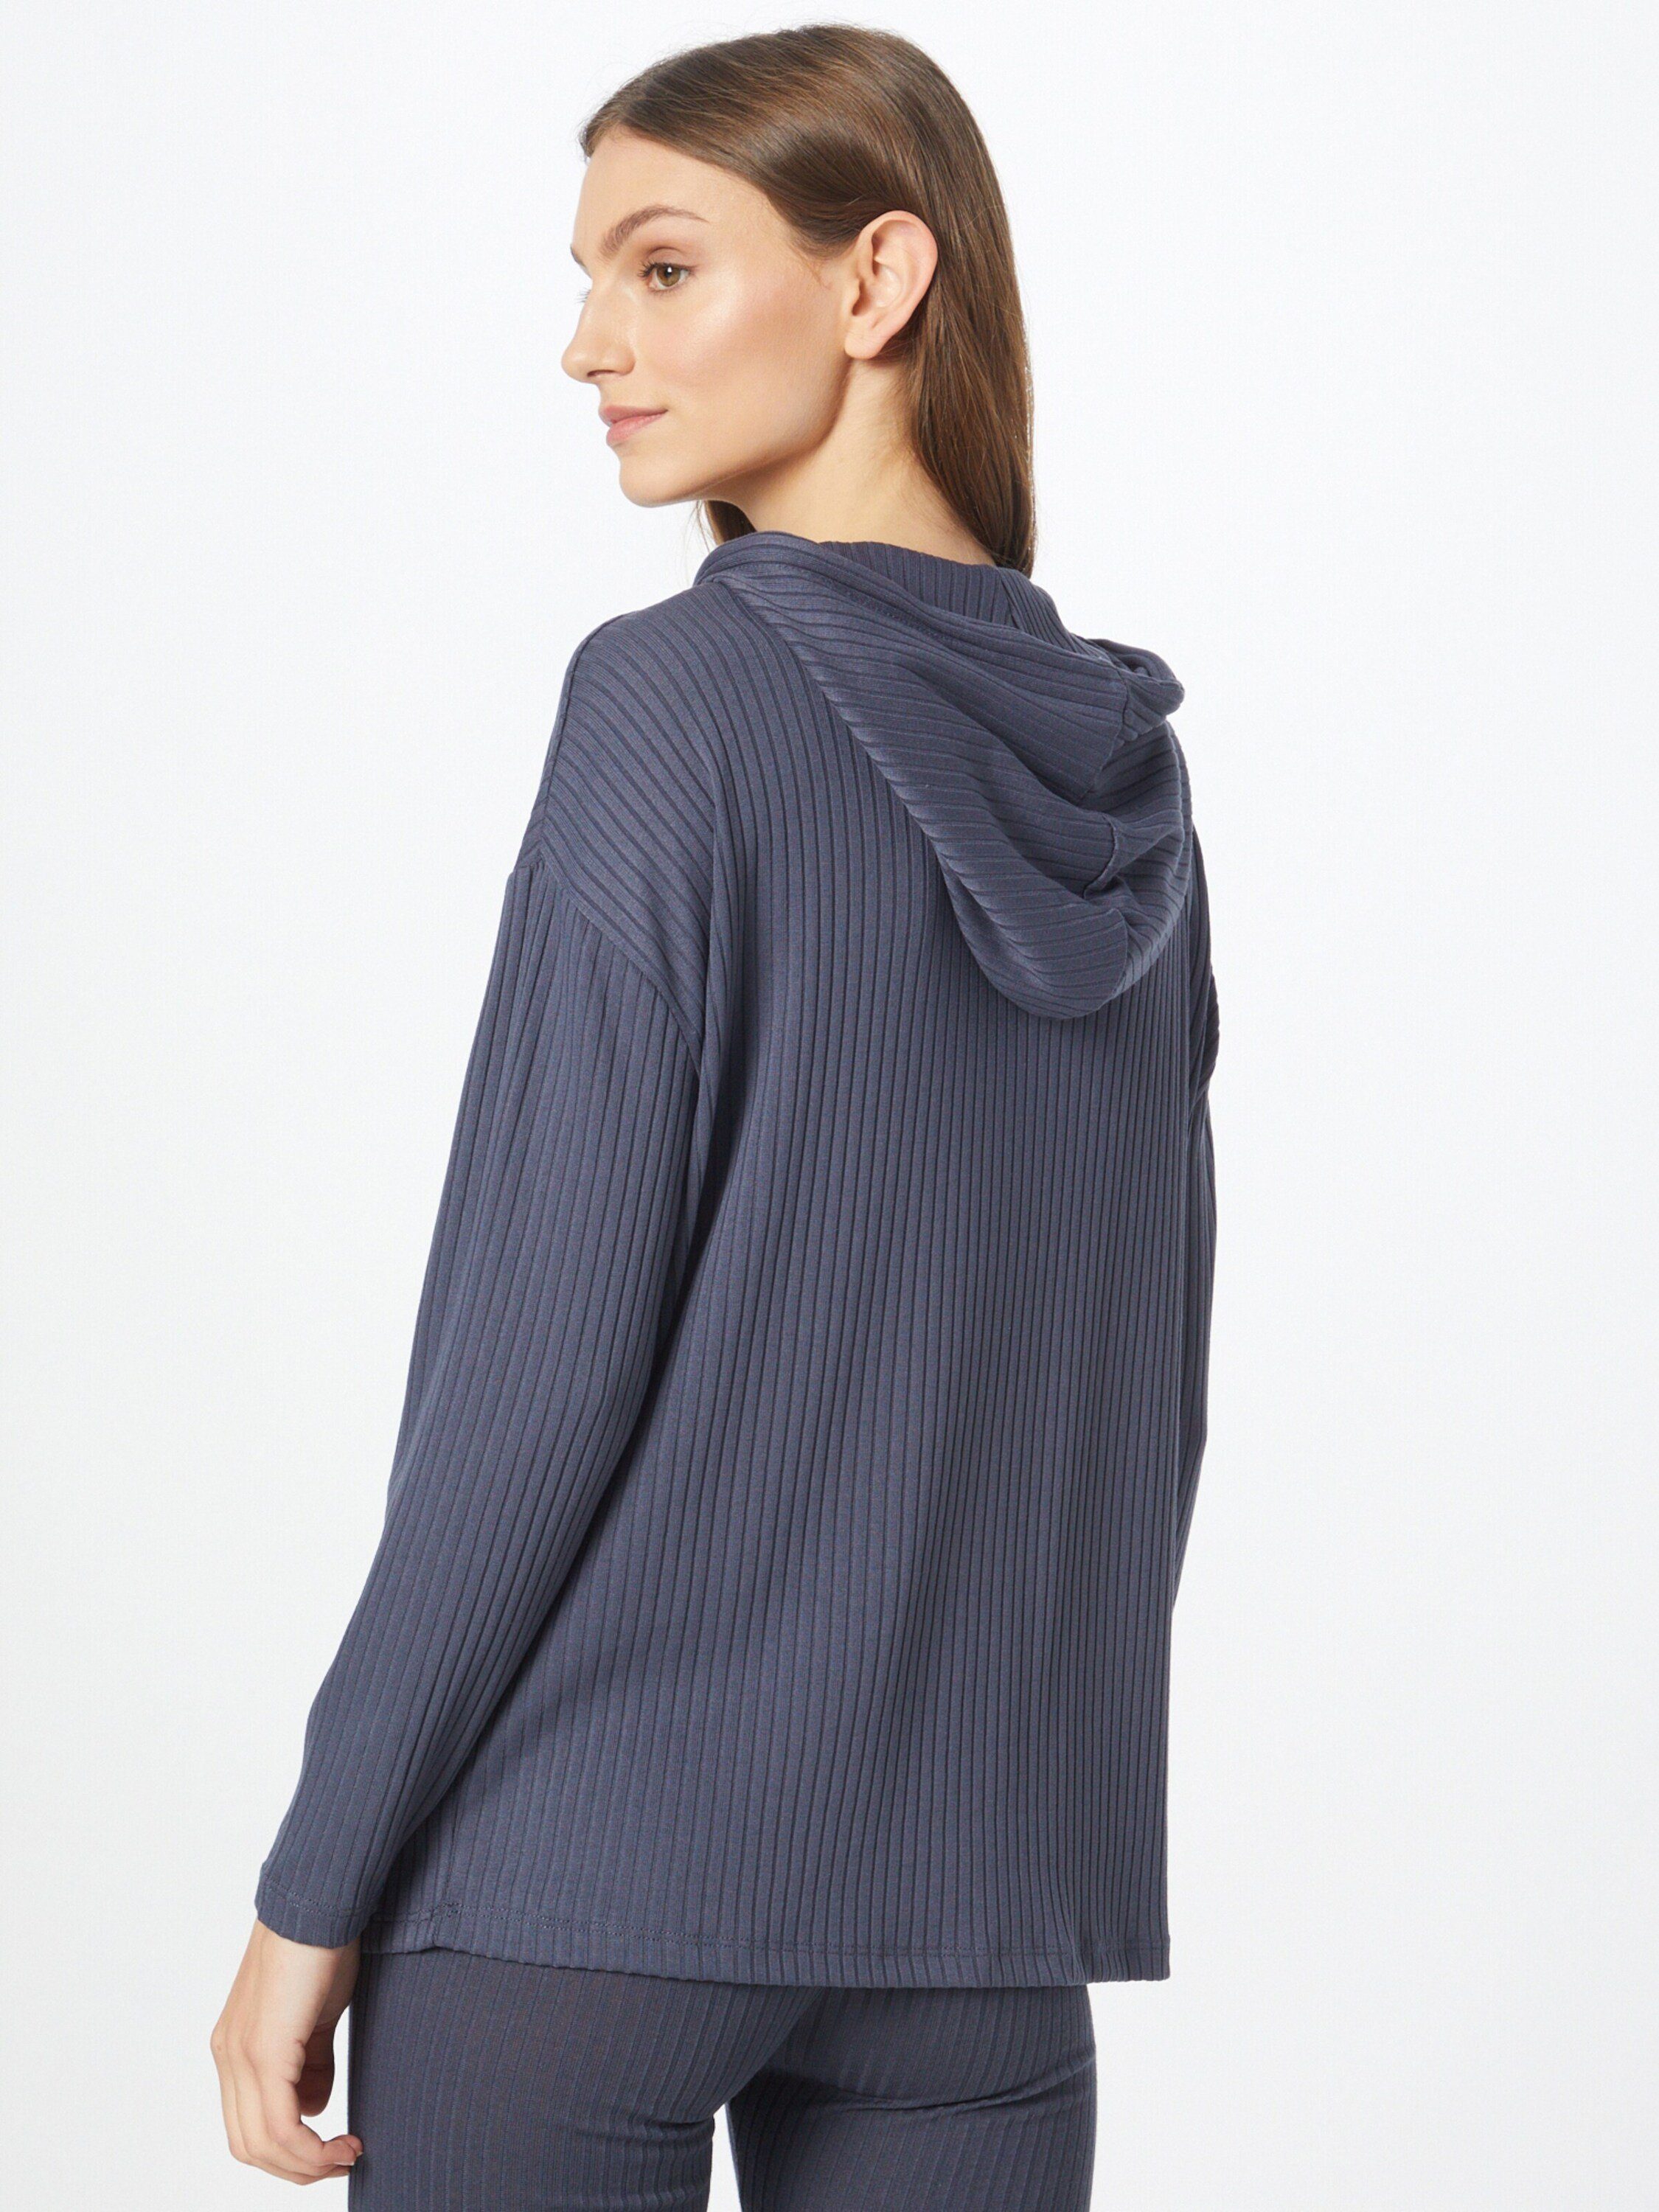 Plain/ohne (1-tlg) Molly Details pieces Strickpullover